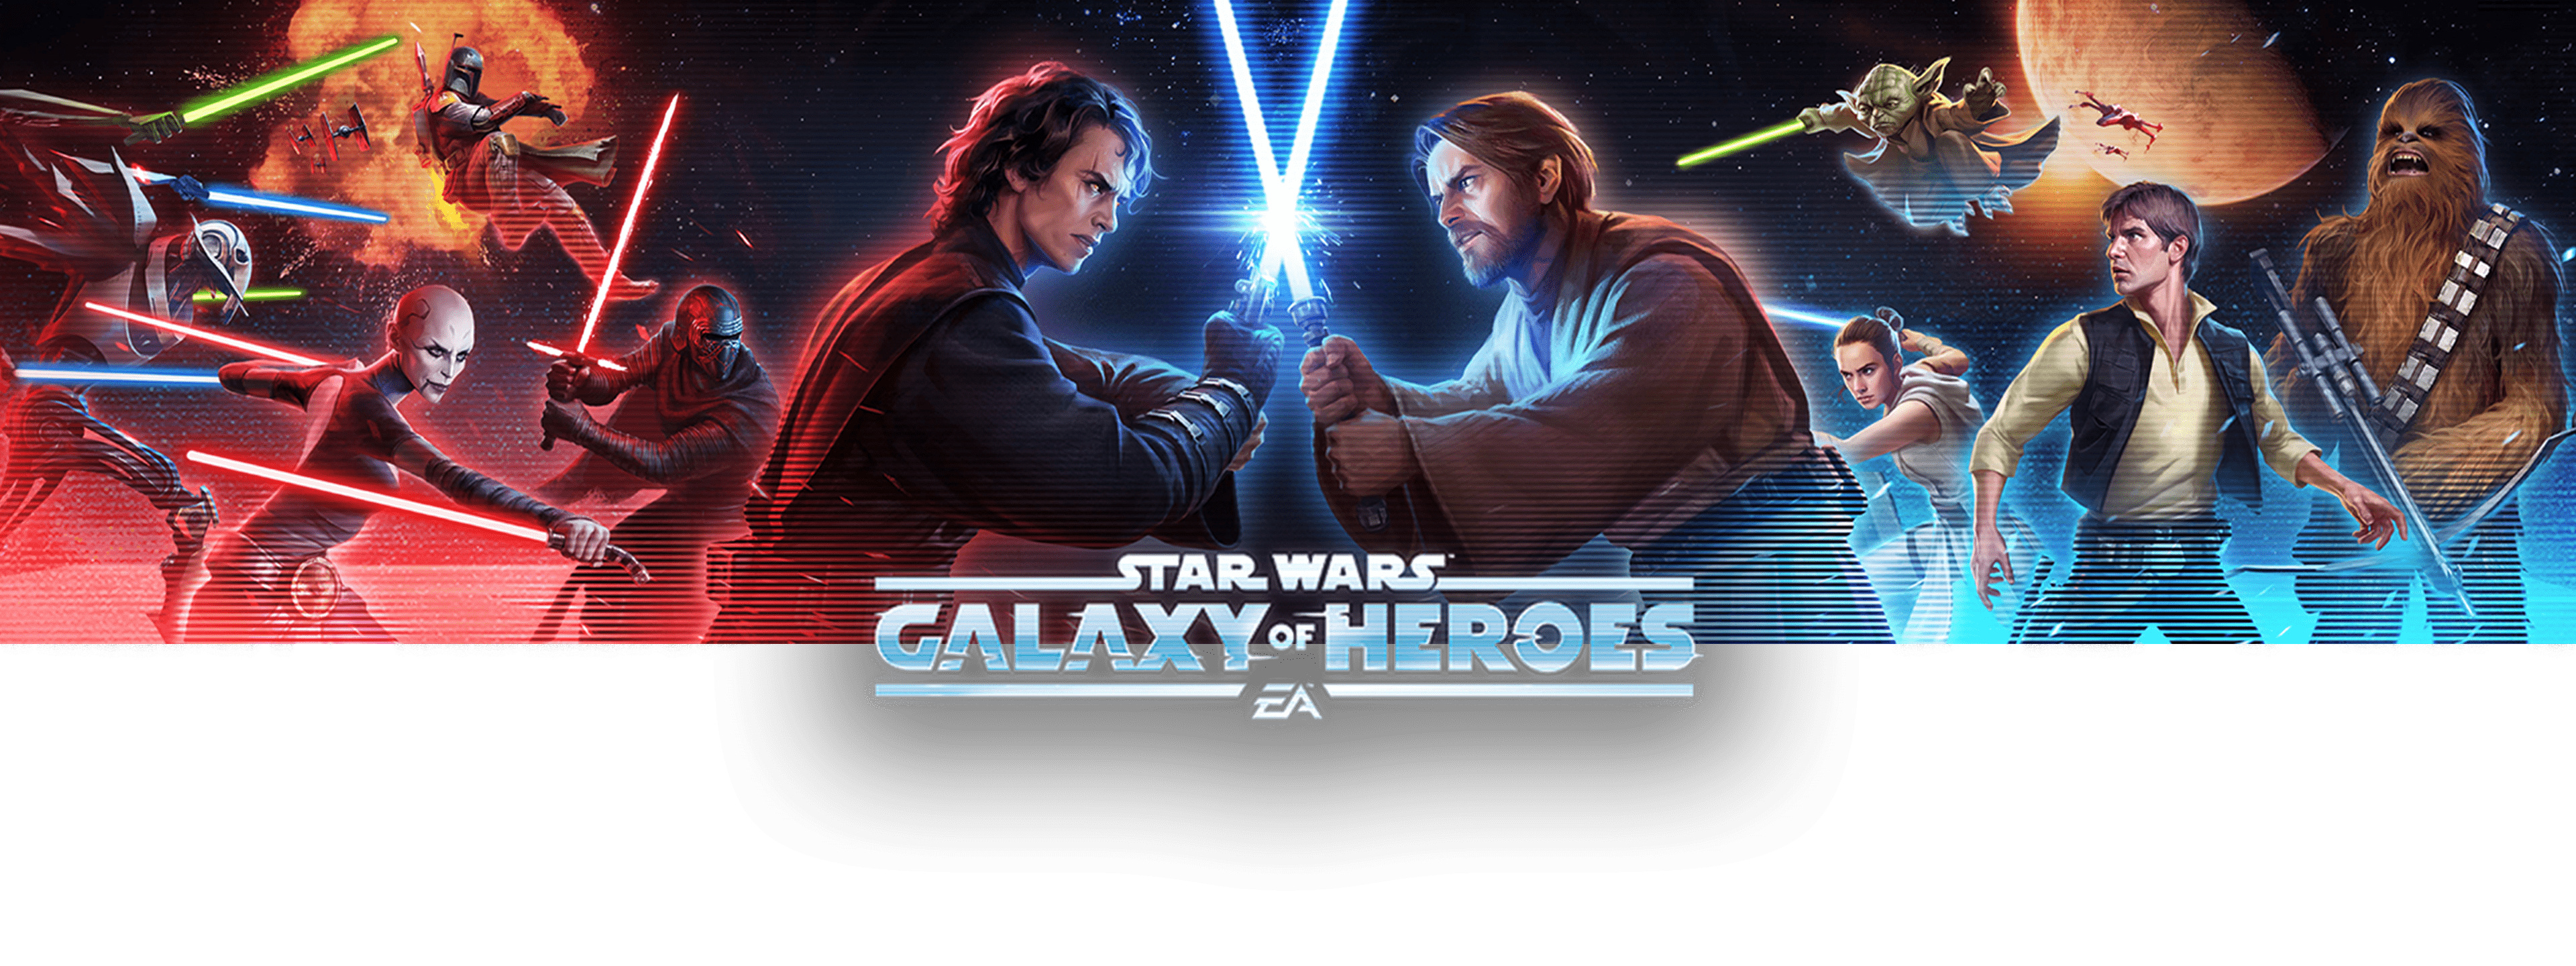 Star Wars: Galaxy of Heroes, Free mobile game, EA official site, Engaging gameplay, 3840x1440 Dual Screen Desktop